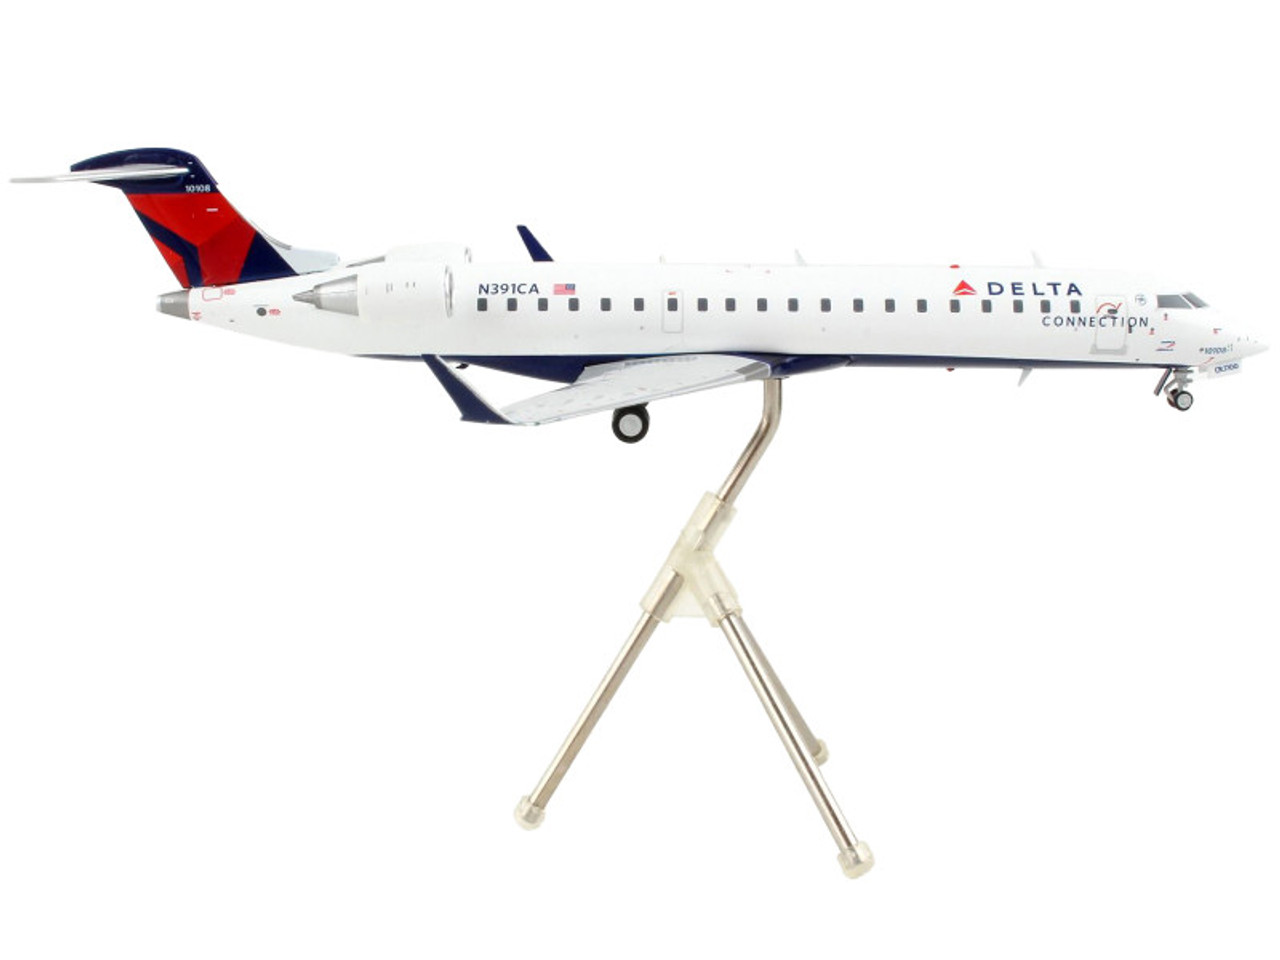 Bombardier CRJ700 Commercial Aircraft "Delta Air Lines - Delta Connection" White with Blue and Red Tail "Gemini 200" Series 1/200 Diecast Model Airplane by GeminiJets